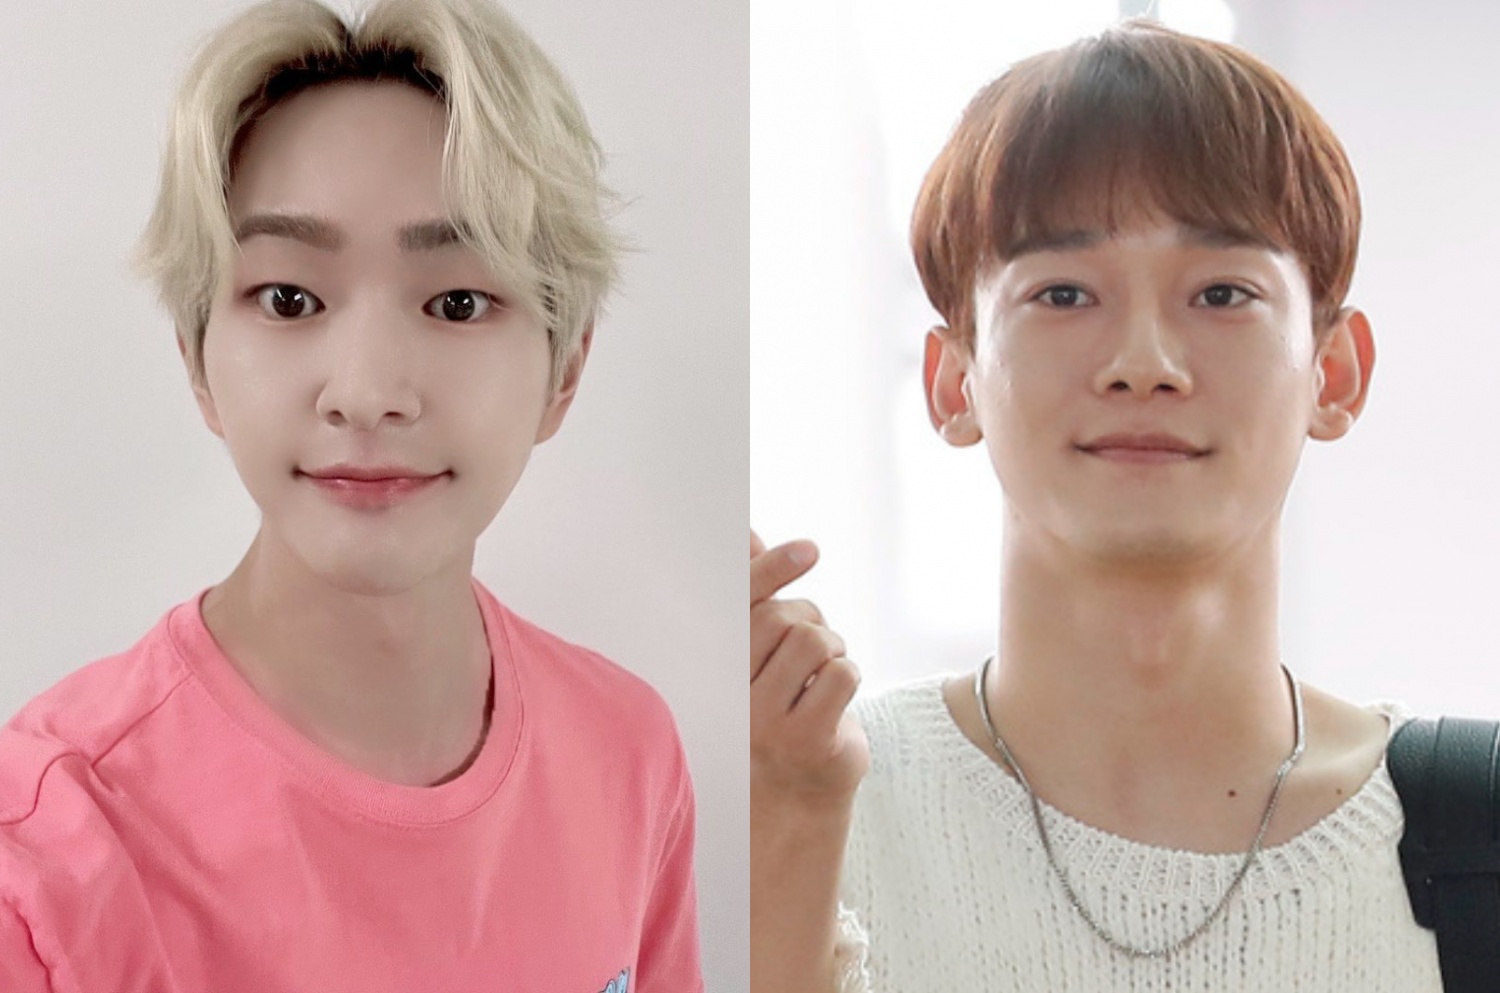 6 K-pop idols fans boycotted: SHINee Onew, more